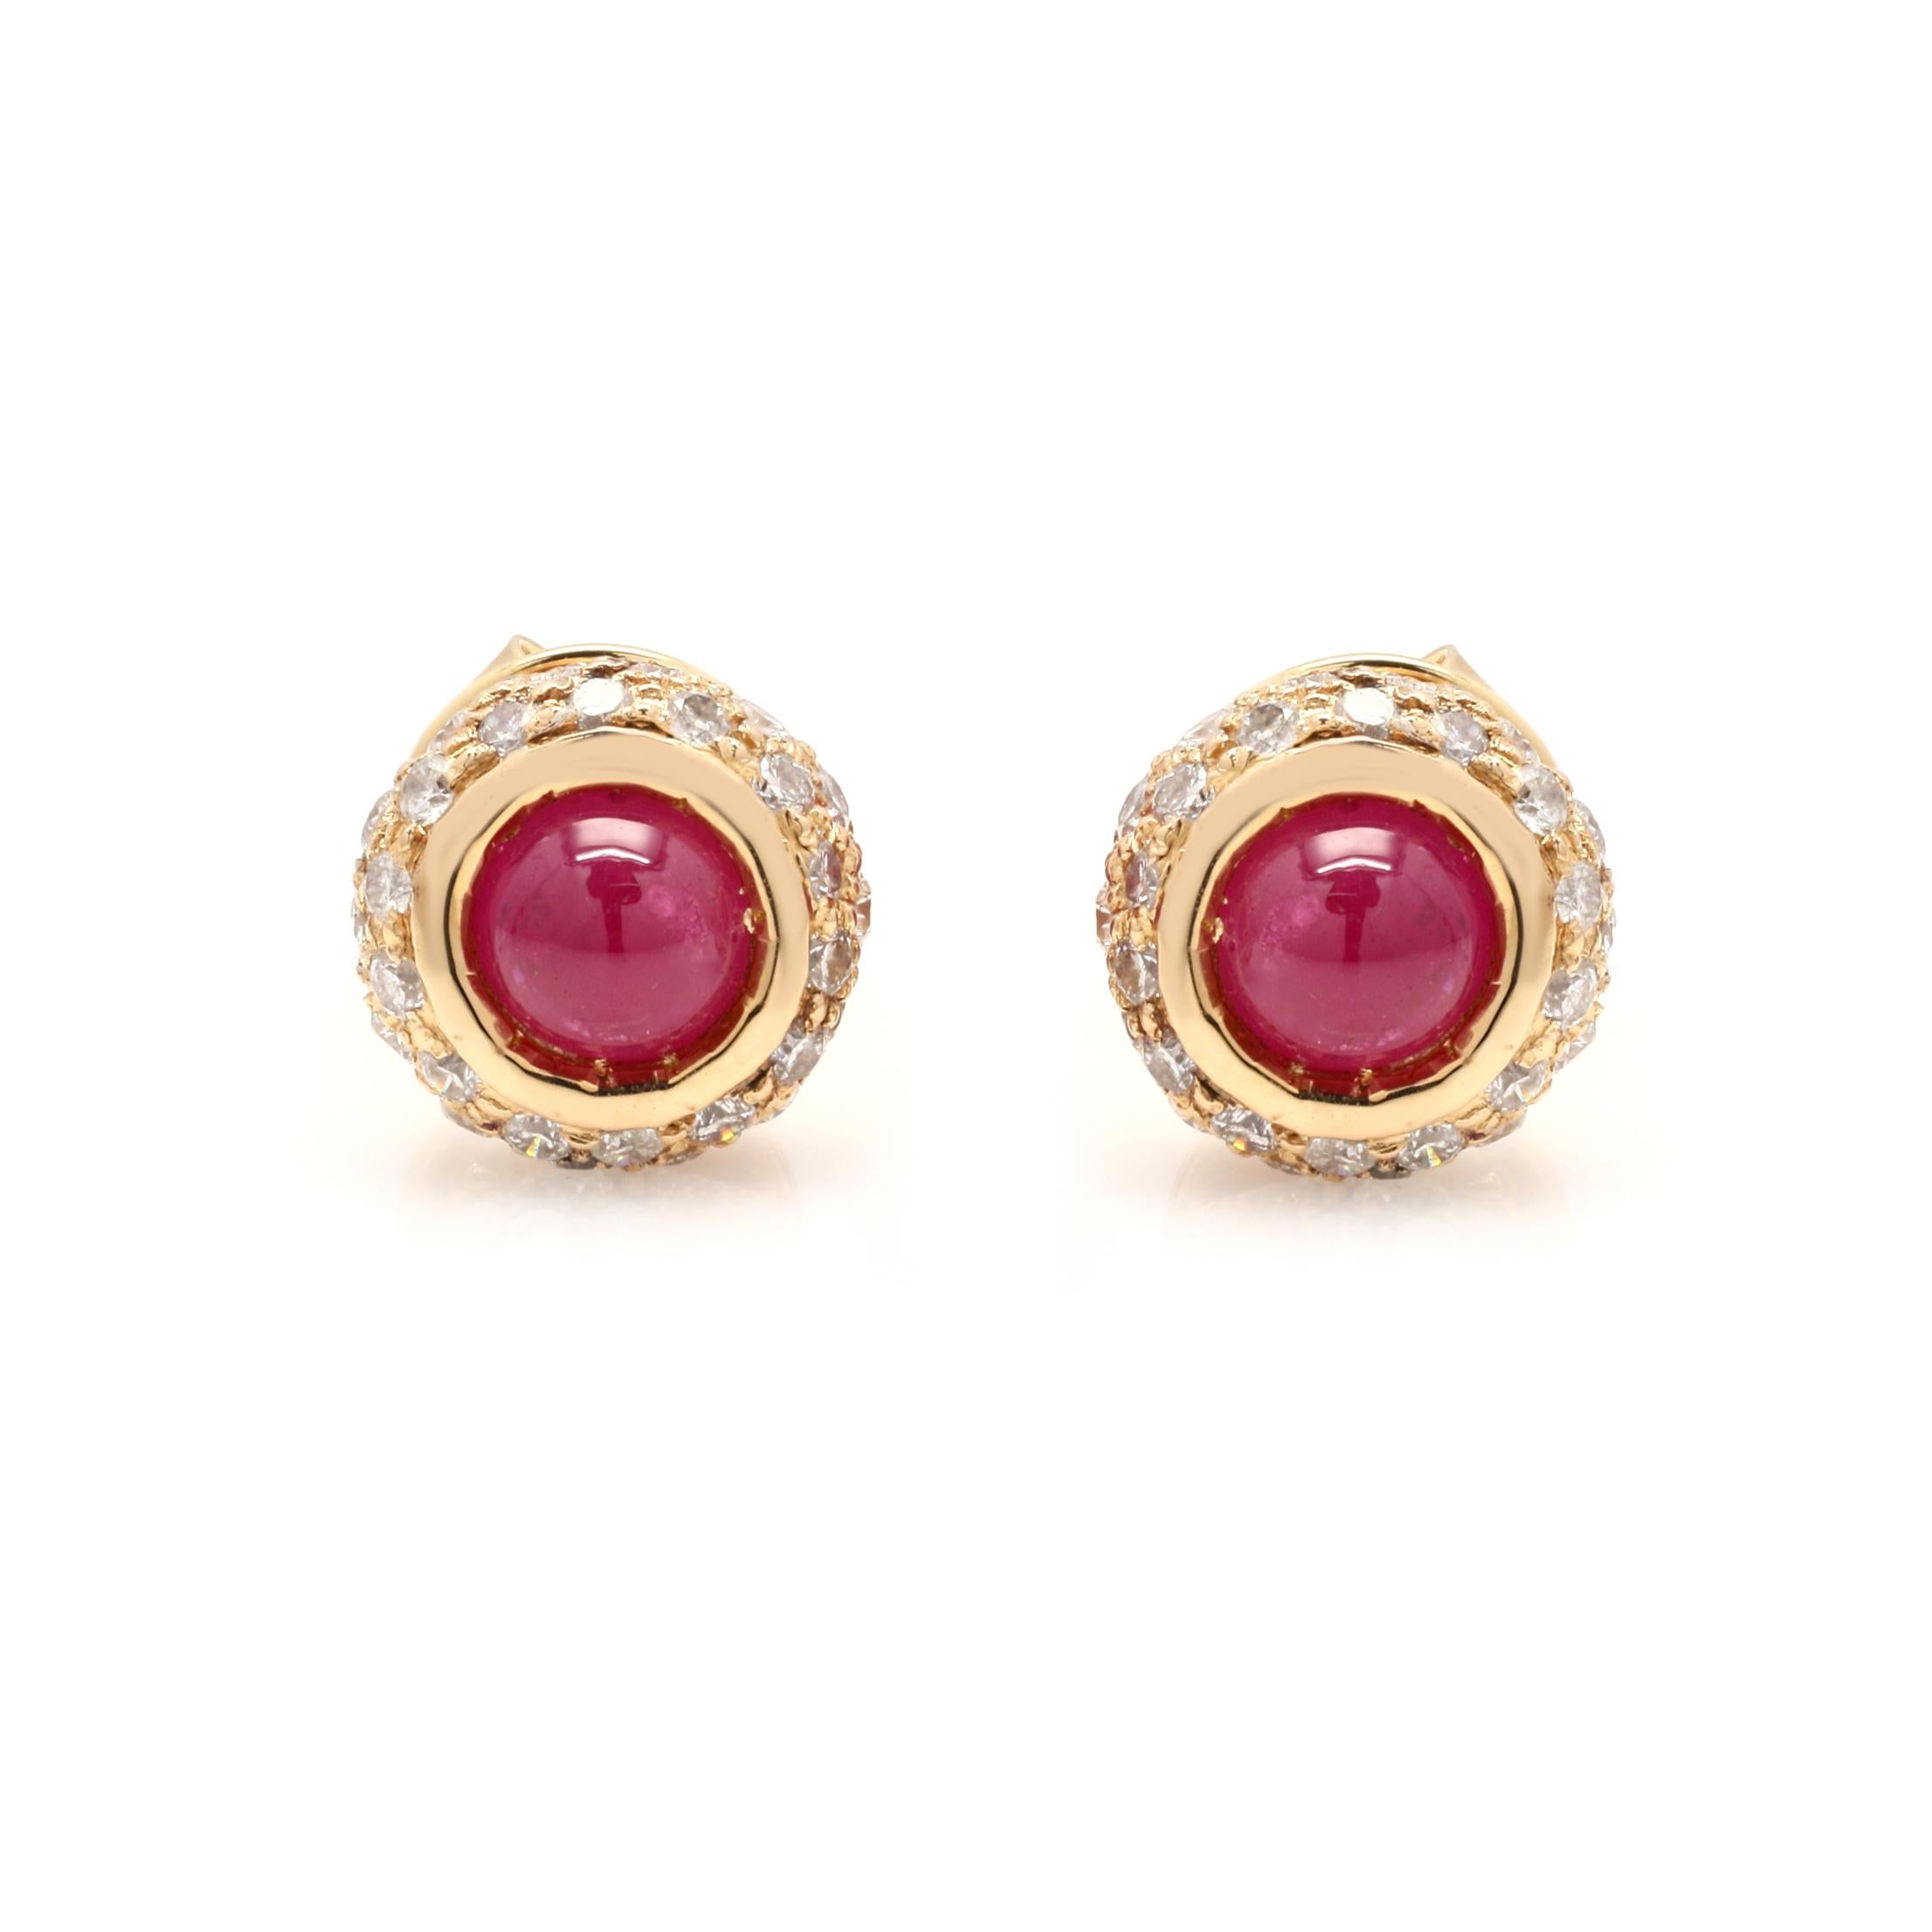 Dainty Halo Diamond and Ruby Pushback Stud Earrings in 18K Gold. Embrace your look with these stunning pair of earrings suitable for any occasion to complete your outfit.
Ruby gemstone improves mental strength.
Featuring 1.4 carats of round ruby